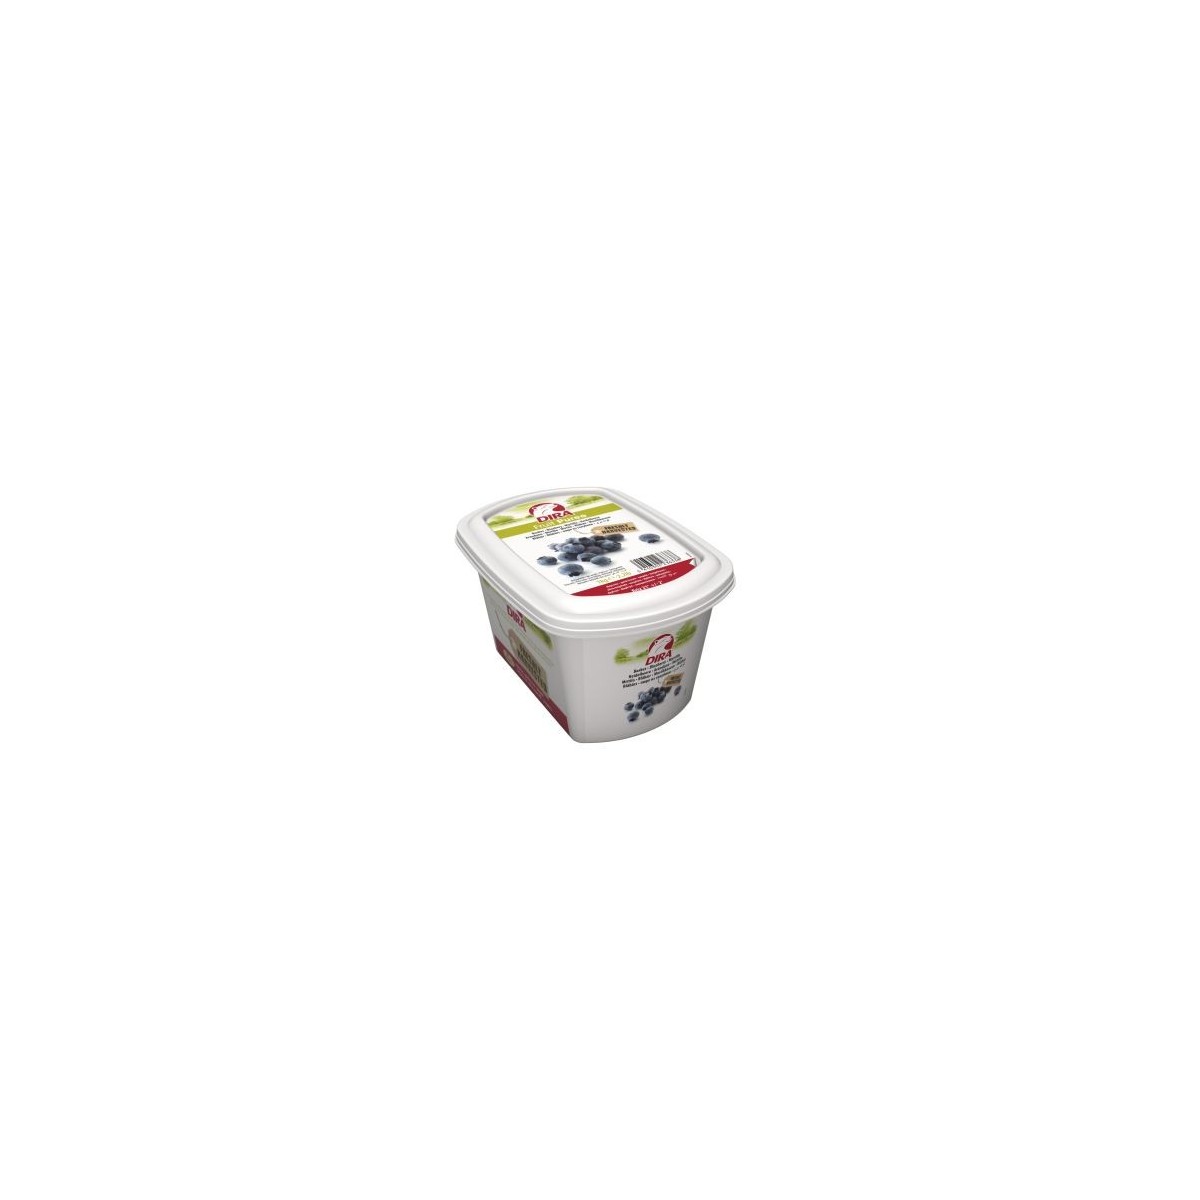 DIRAFROST PUREE BLUEBERRY WITHOUT SEED 4 X 1KG KG